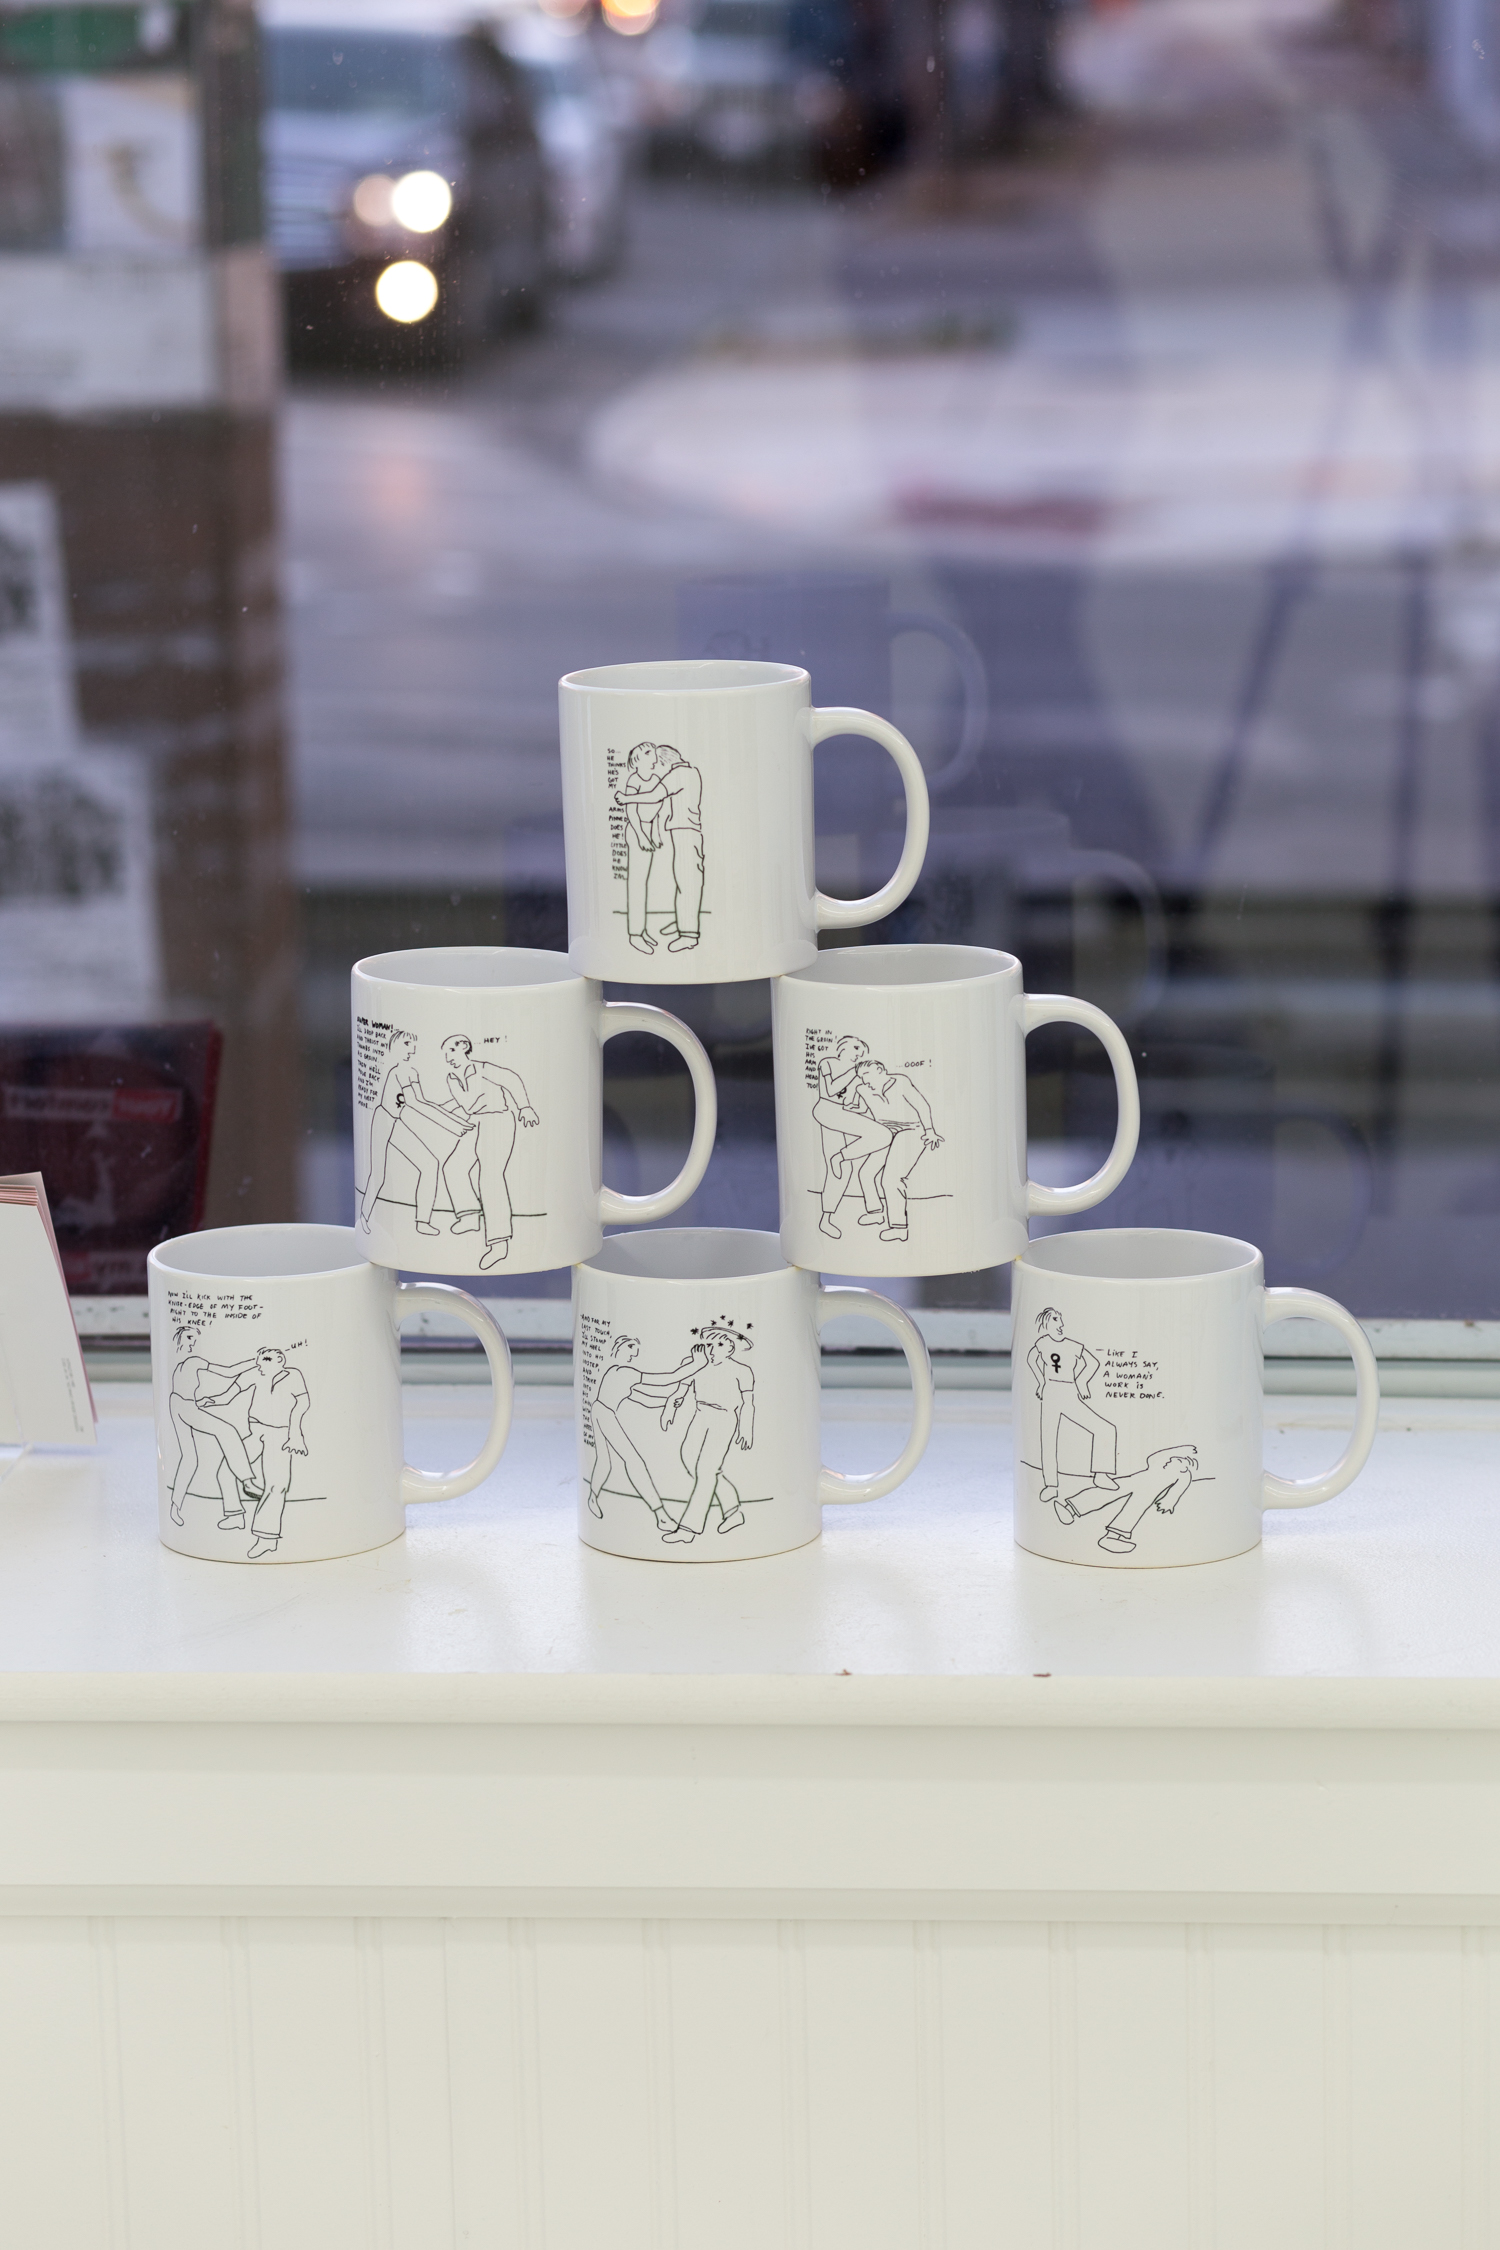 Mugs decorated with line drawings are stacked in a pyramid formation